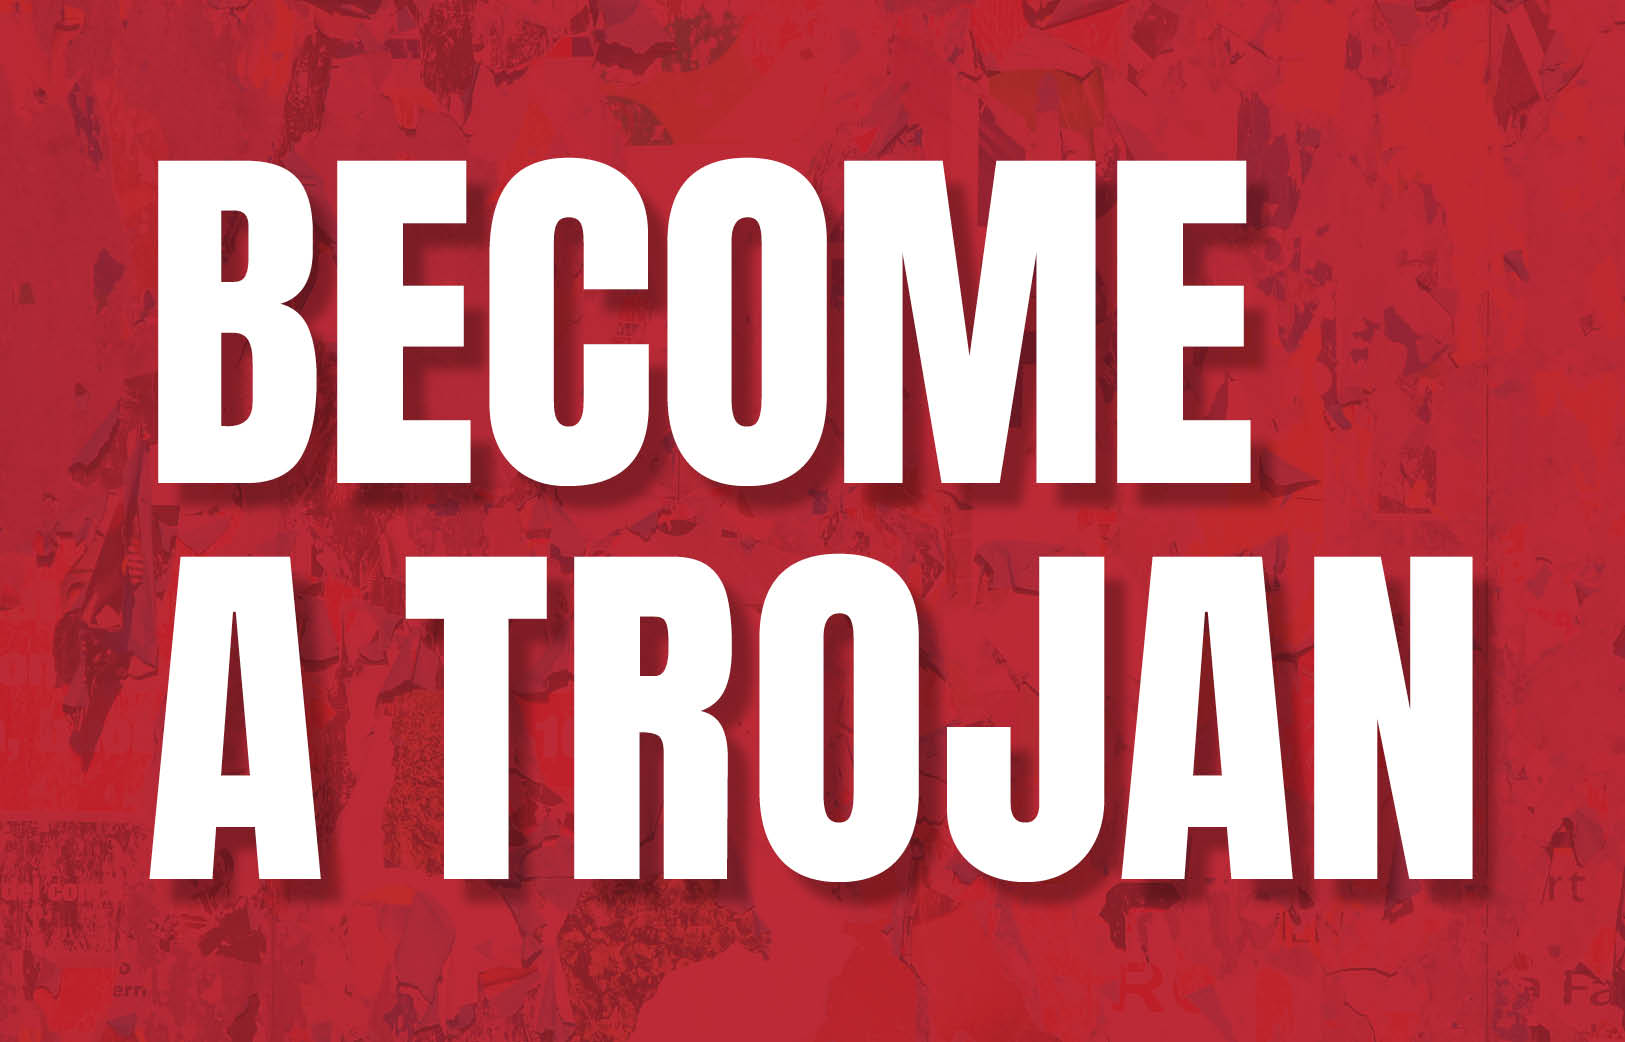 Click here to become a Trojan!